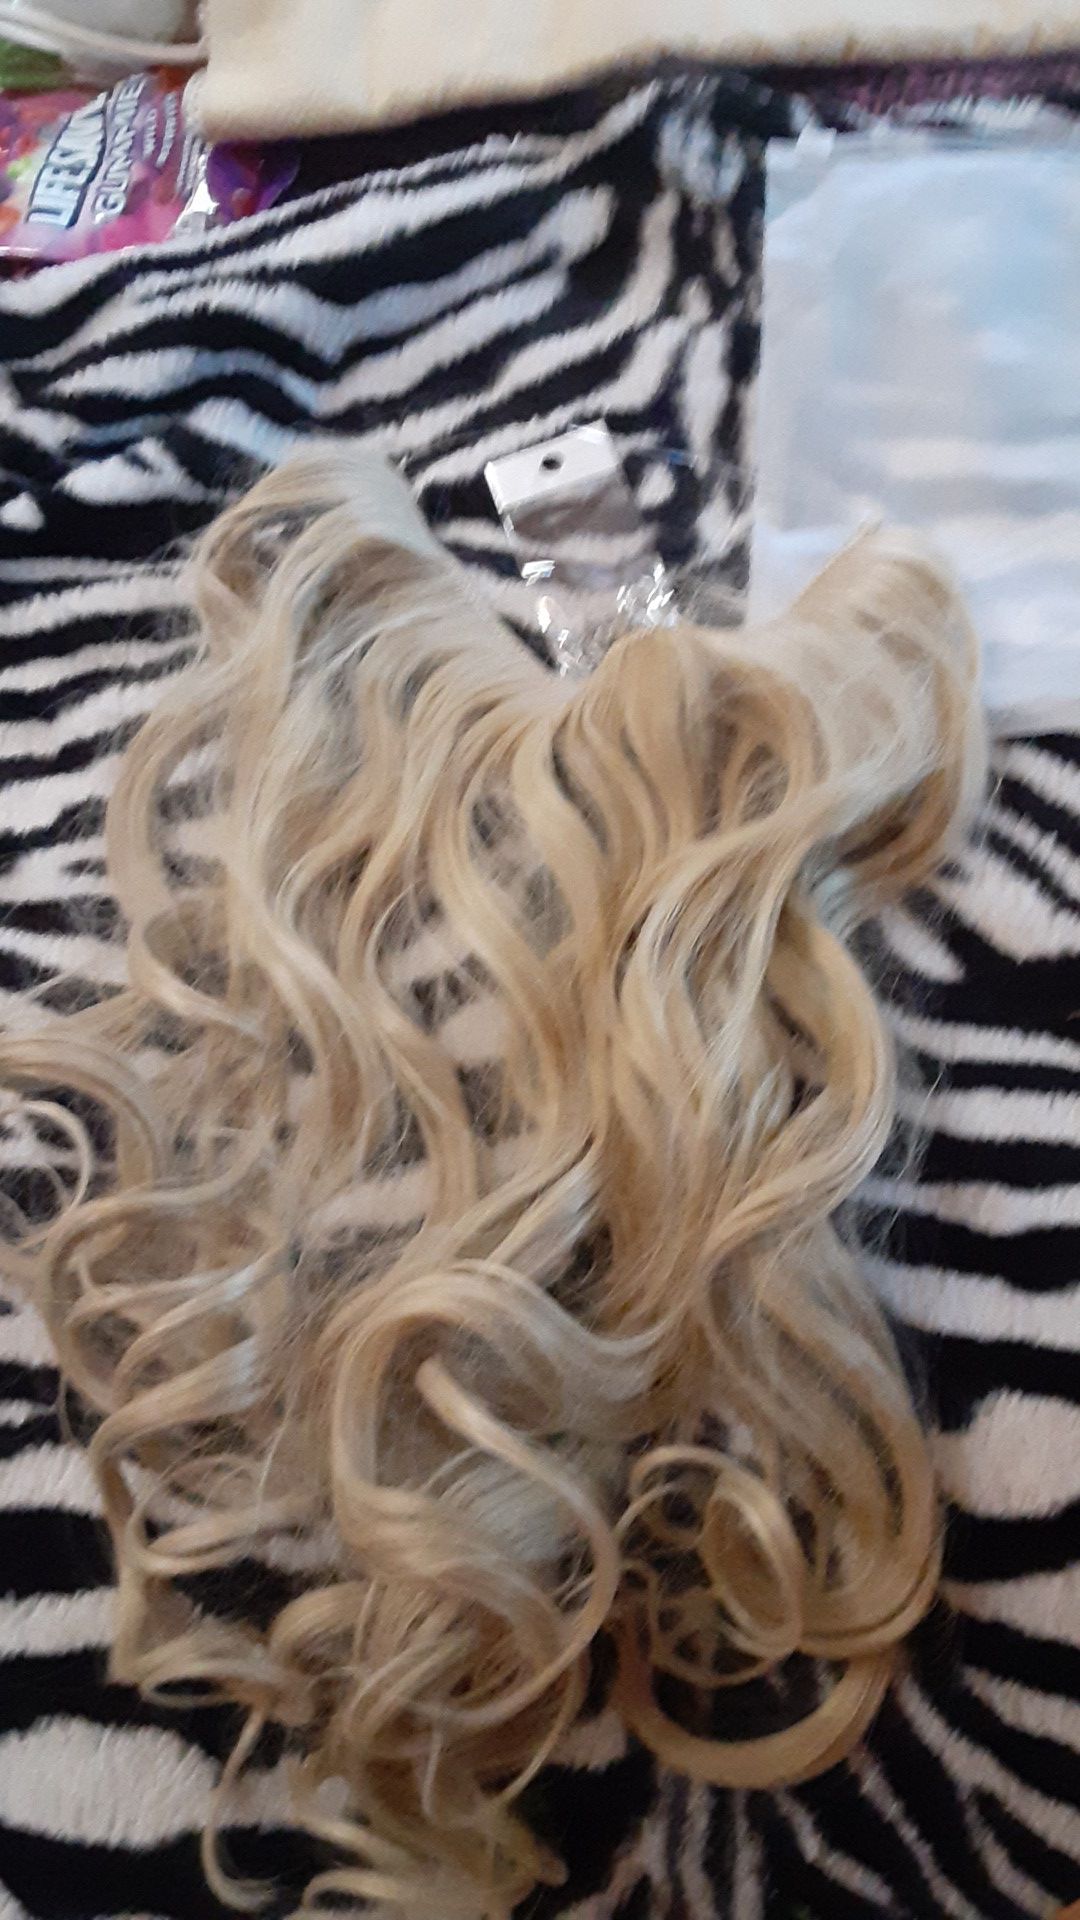 Rubber band hair extension must pickup only